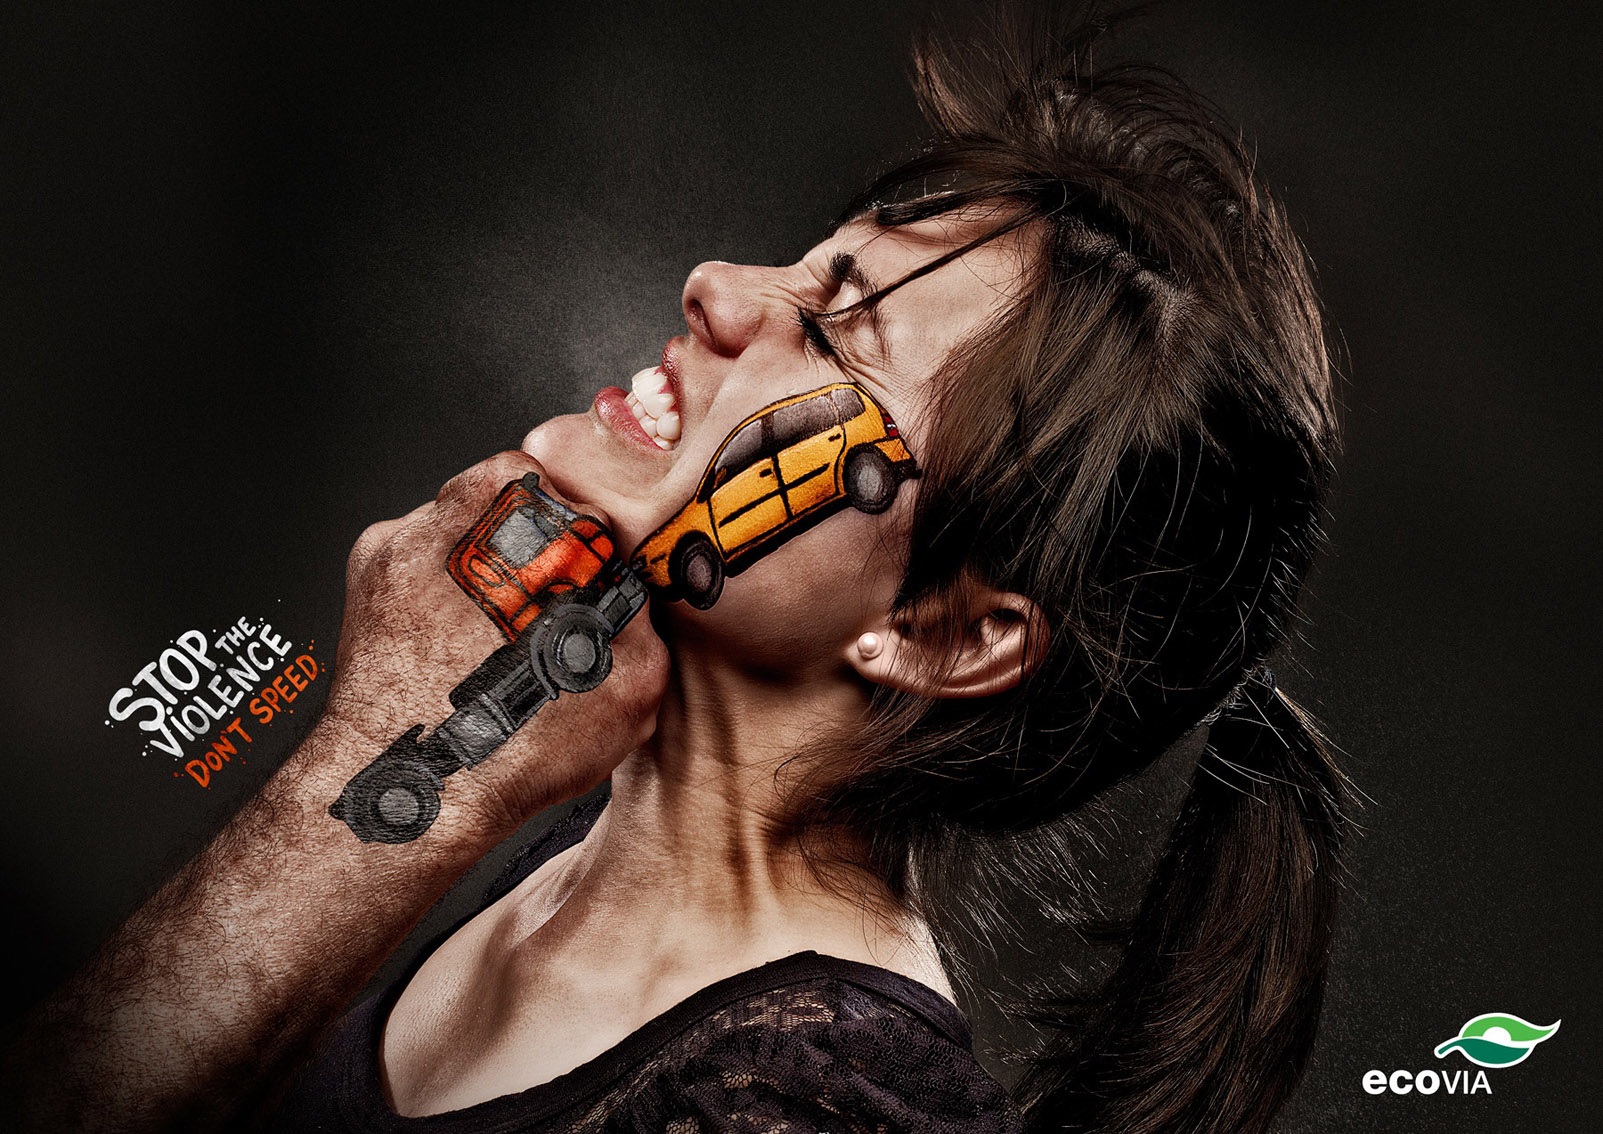 BlueWayDesign: Top 10 Advertising Campaigns For Inspiration